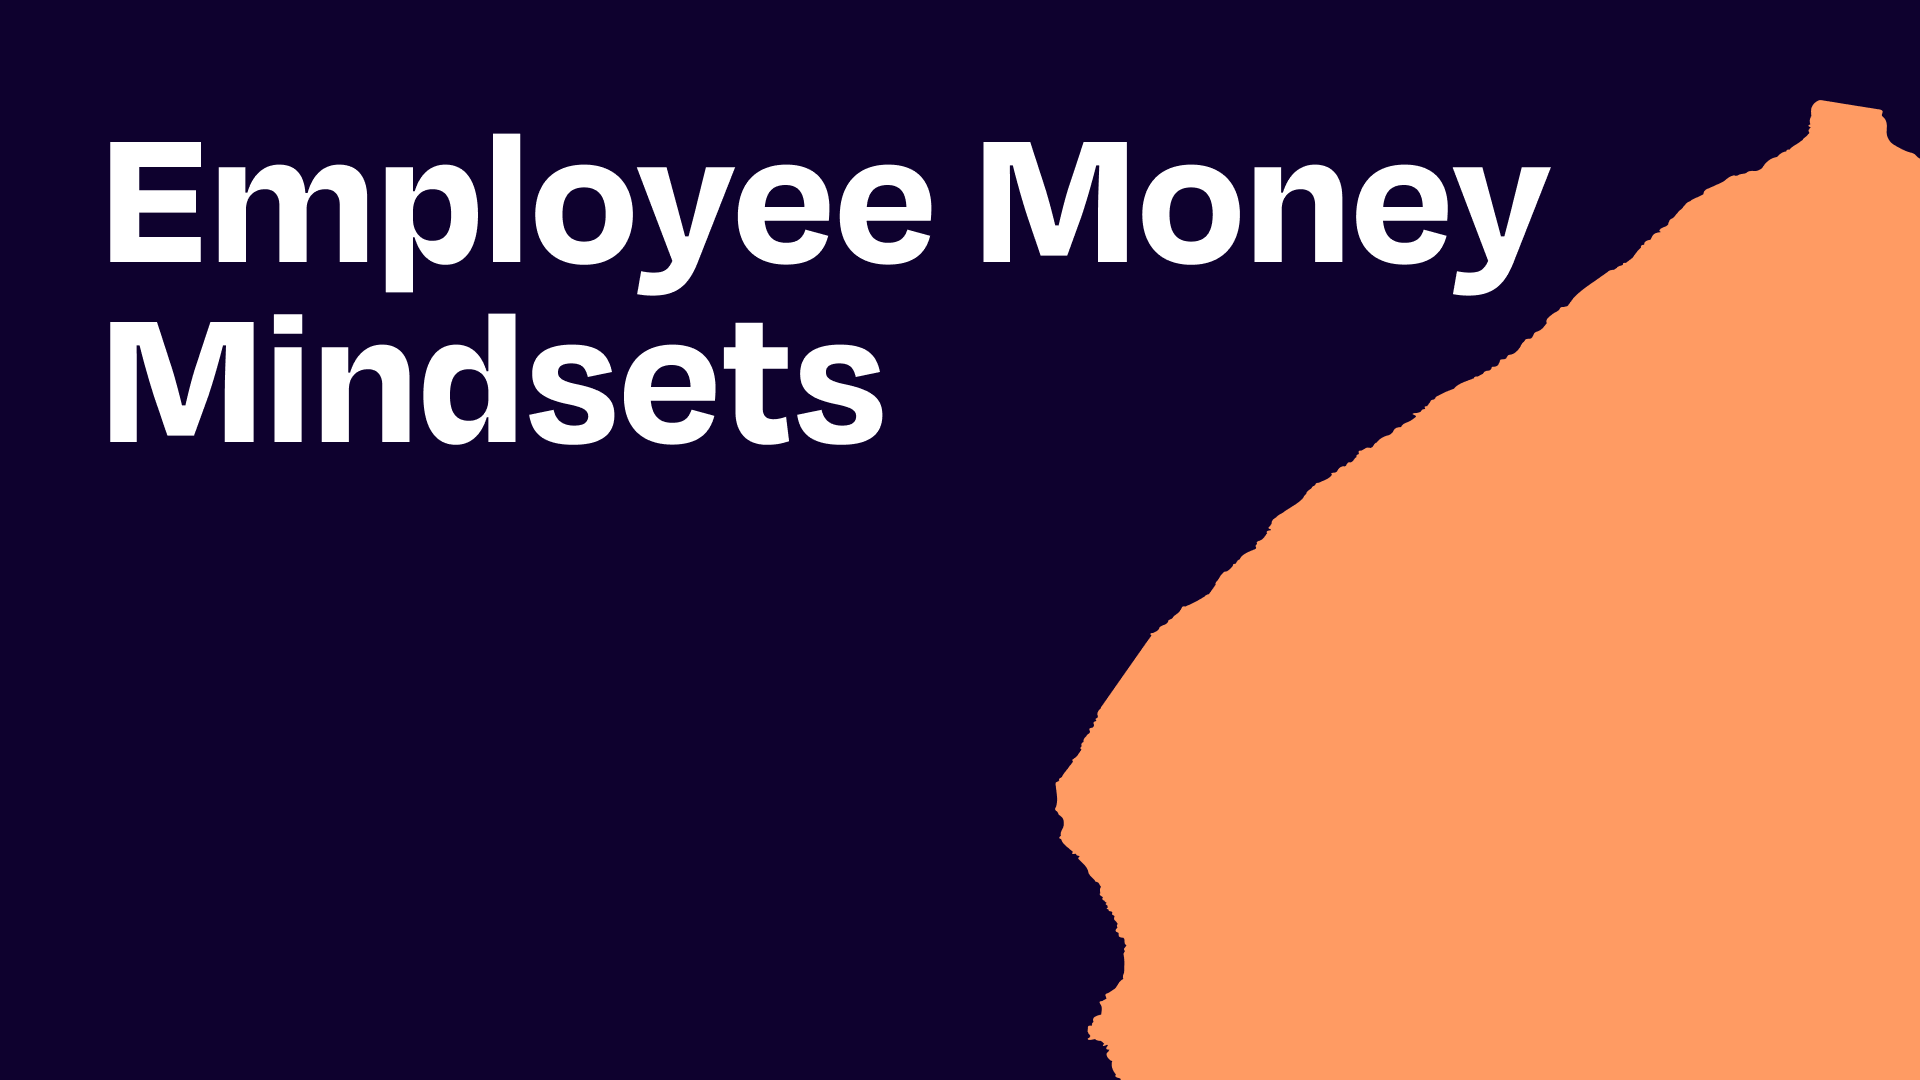 Rising Cost of Living: Employee Money Mindsets